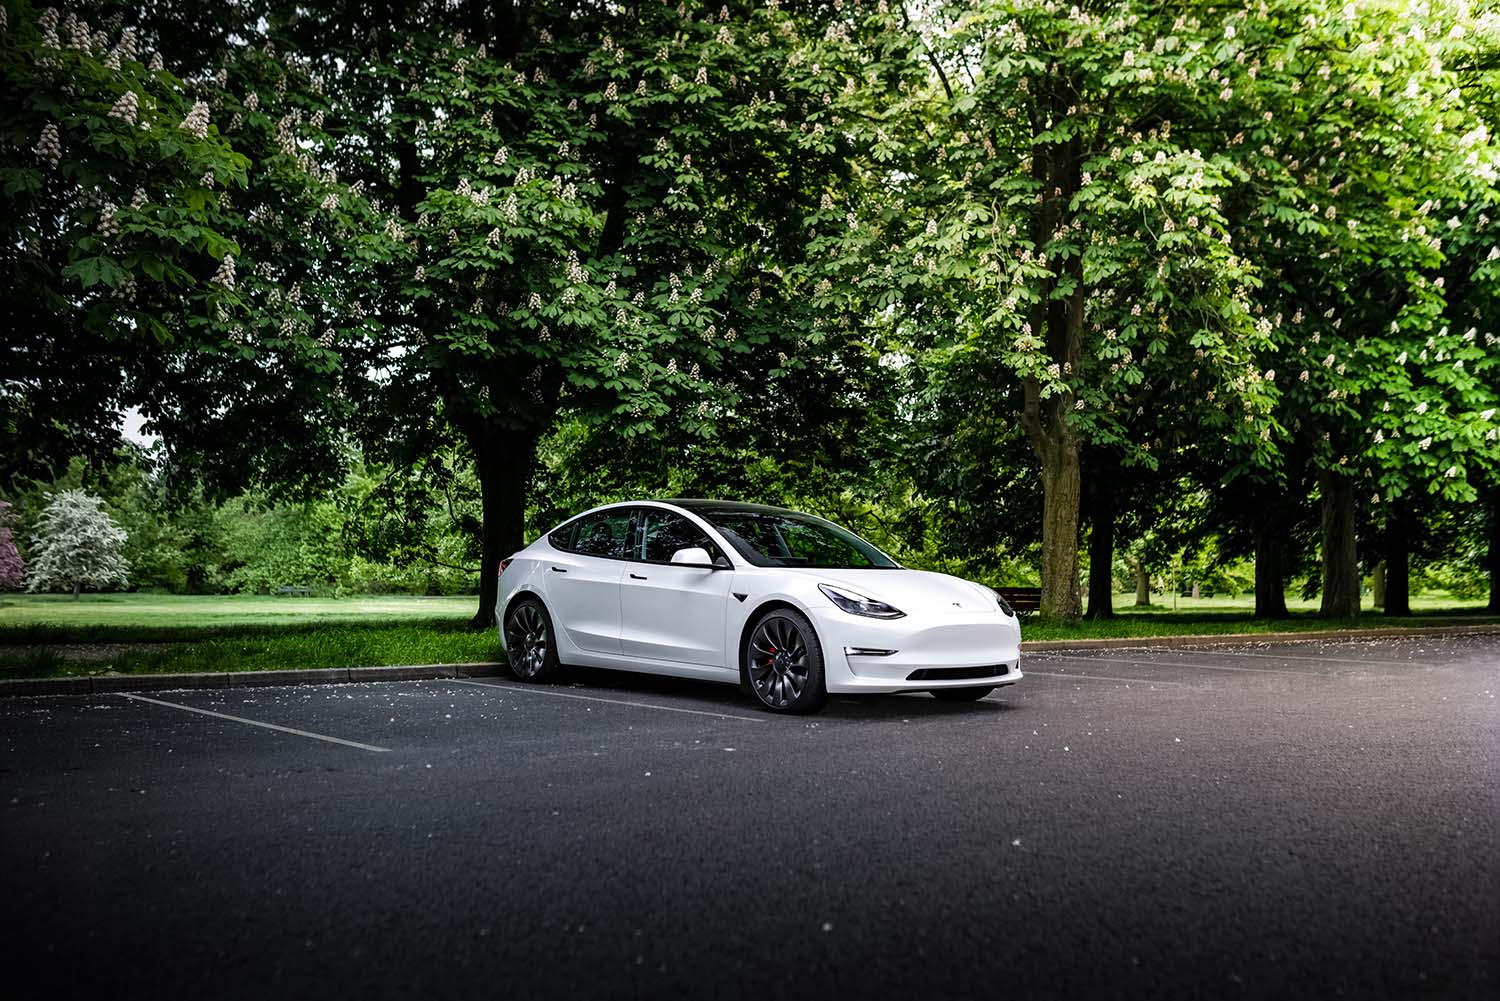 White Tesla Model 3 in parking lot with trees in the background.